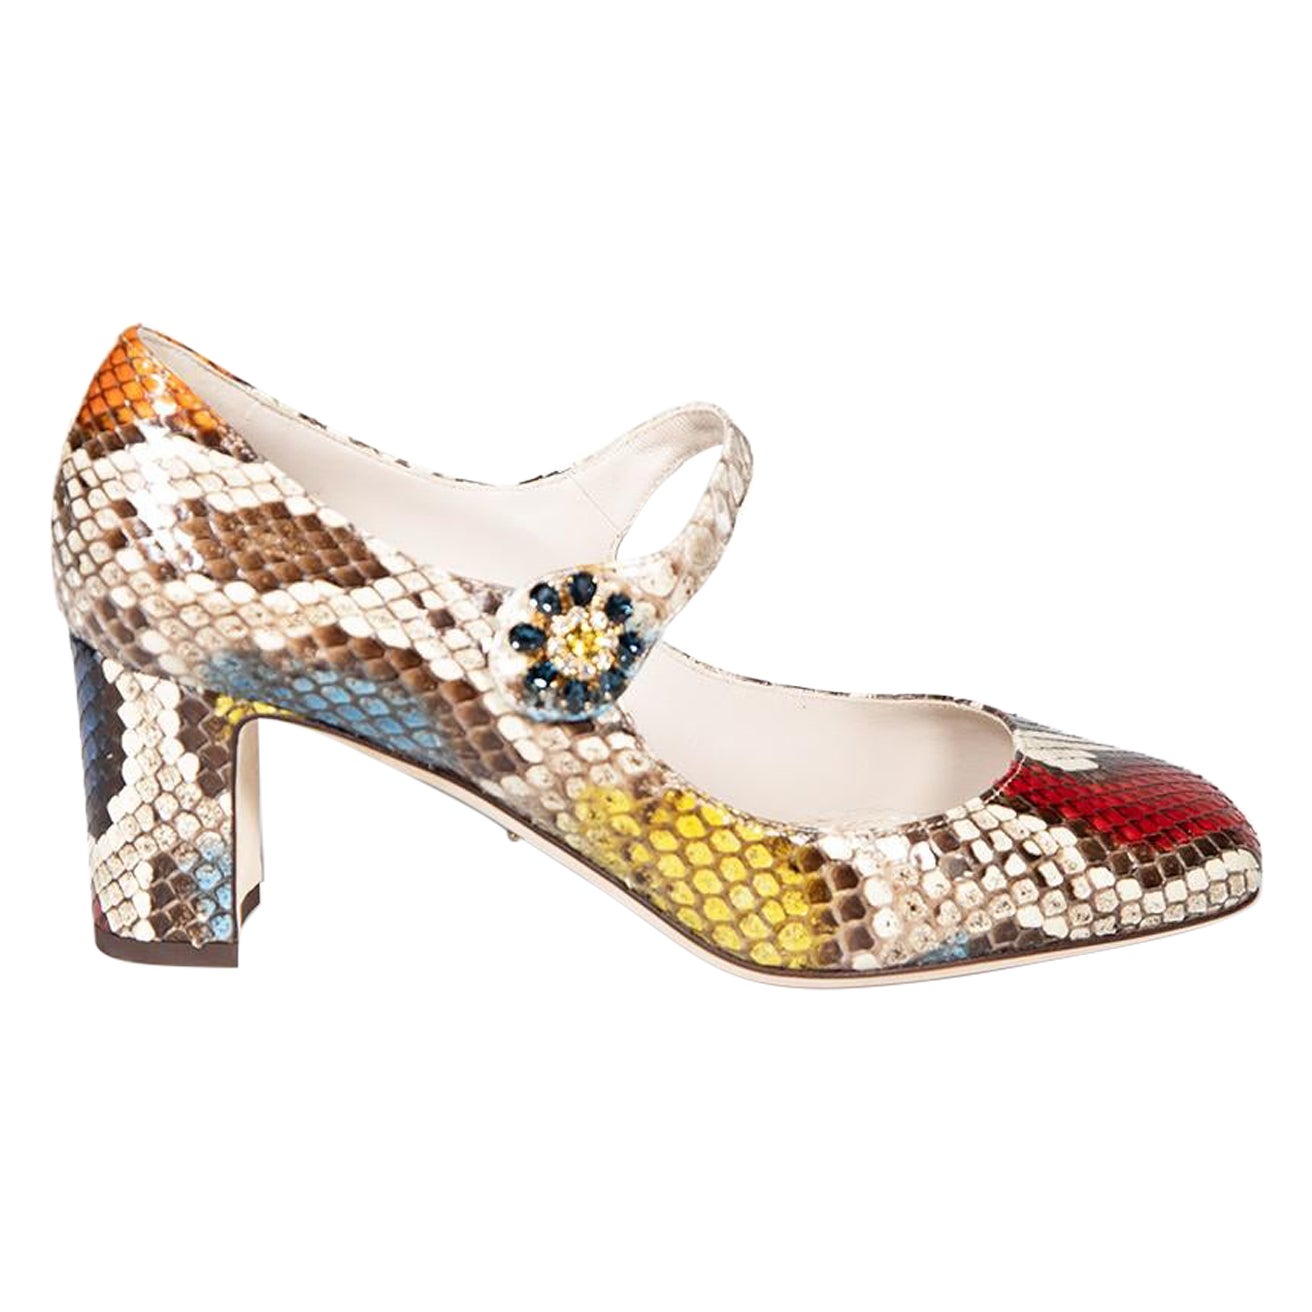 Dolce & Gabbana Python Leather Mary Jane Shoes Size IT 38.5 For Sale